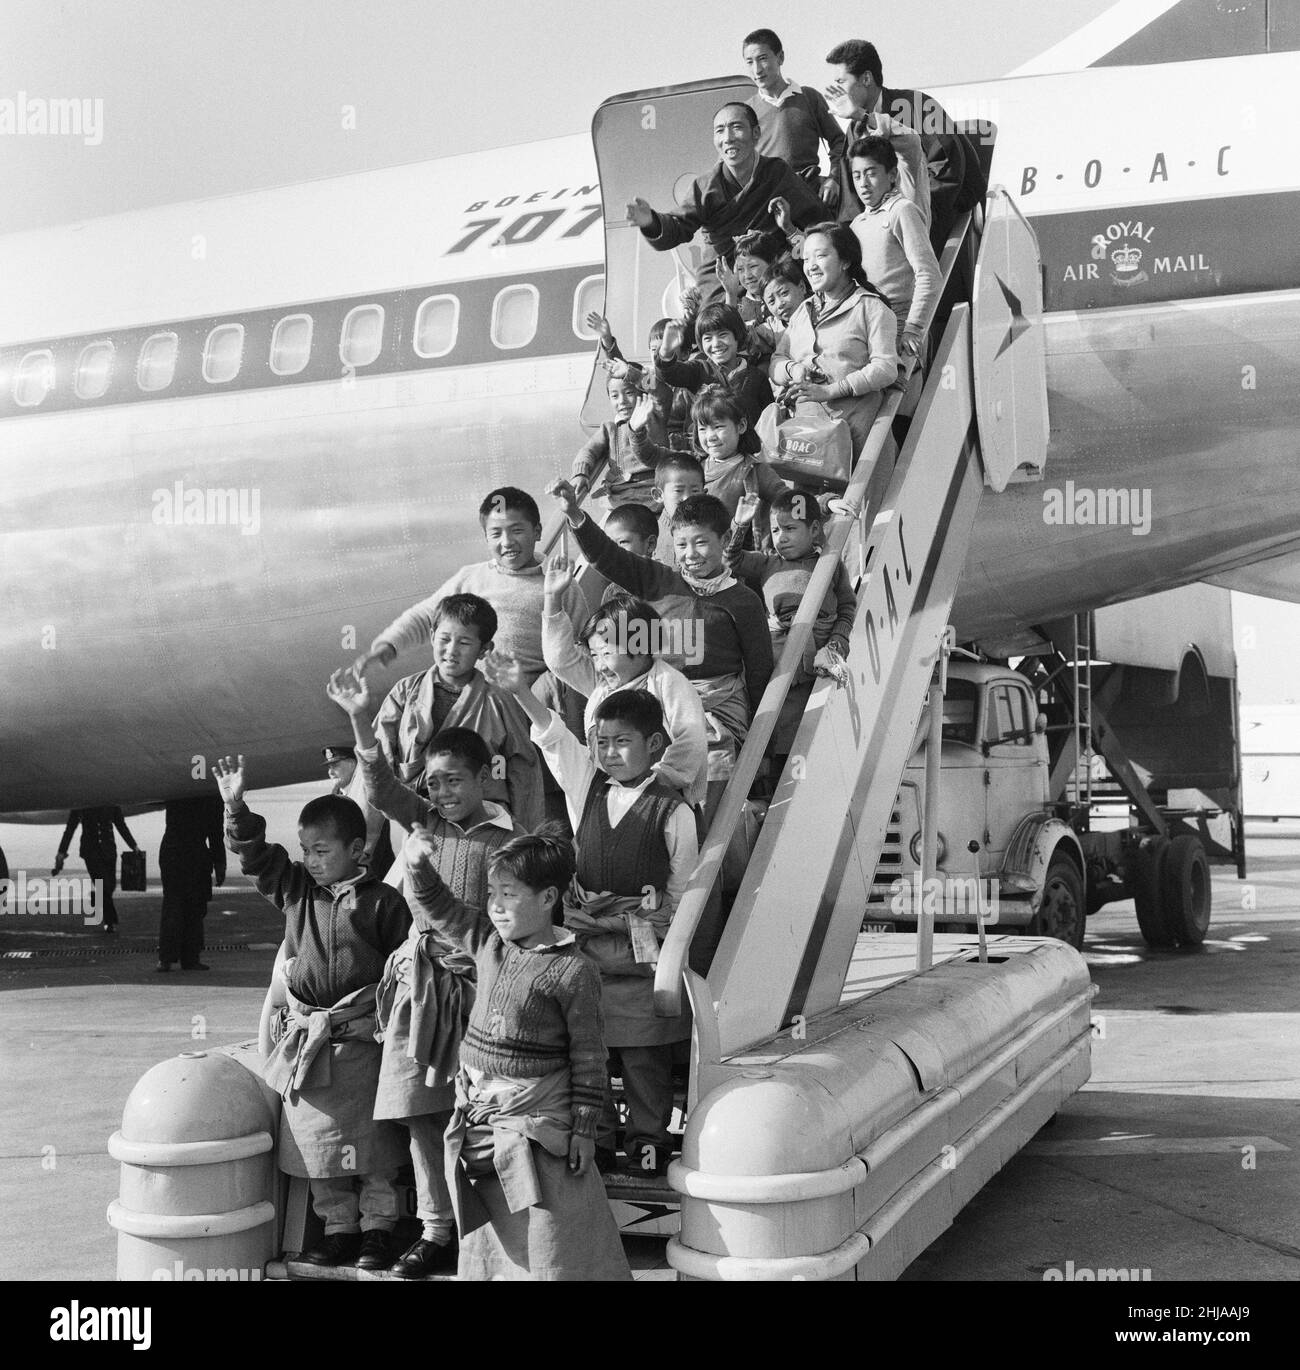 21 Tibetan Refugee Children land at London Heathrow Airport, Tuesday 26th February 1963. A BOAC Airliner brings the thirteen boys and eight girls to the UK, from a refugee camp in northern India. Many now orphaned, the children have fled chinese occupation and persecution.   Our Picture Show ... tibetan refugees pose for photographs as they leave aircraft.   The children are to be relocated to the Pestalozzi Village for Children in Sedlescombe, East Sussex, which will be their new home for the next ten years.   The community is named after eighteenth century Swiss educationalist, Johann Heinri Stock Photo